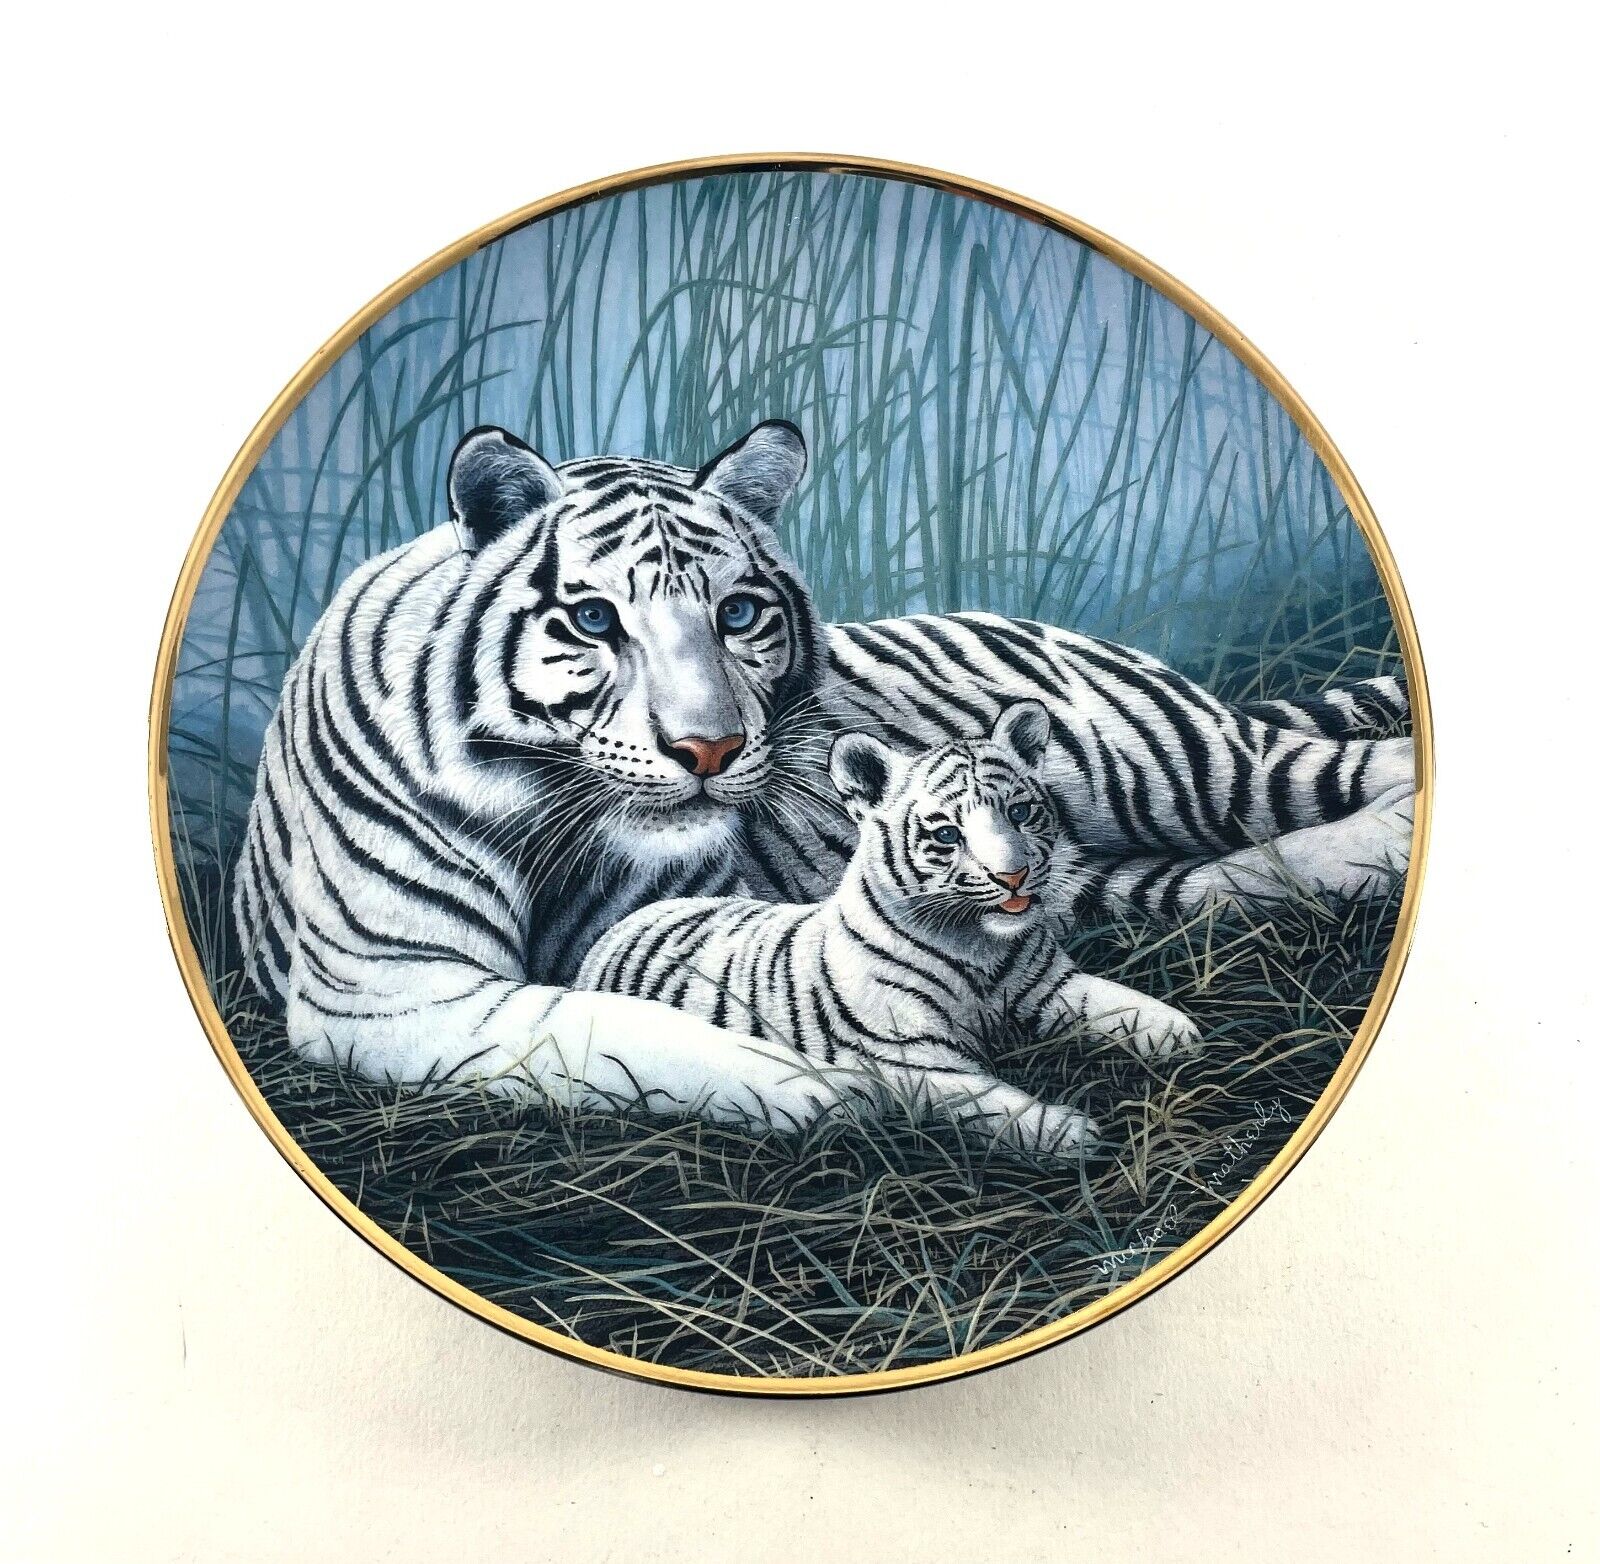 Limited Edition National Wildlife Federation “White Tigers” Plate